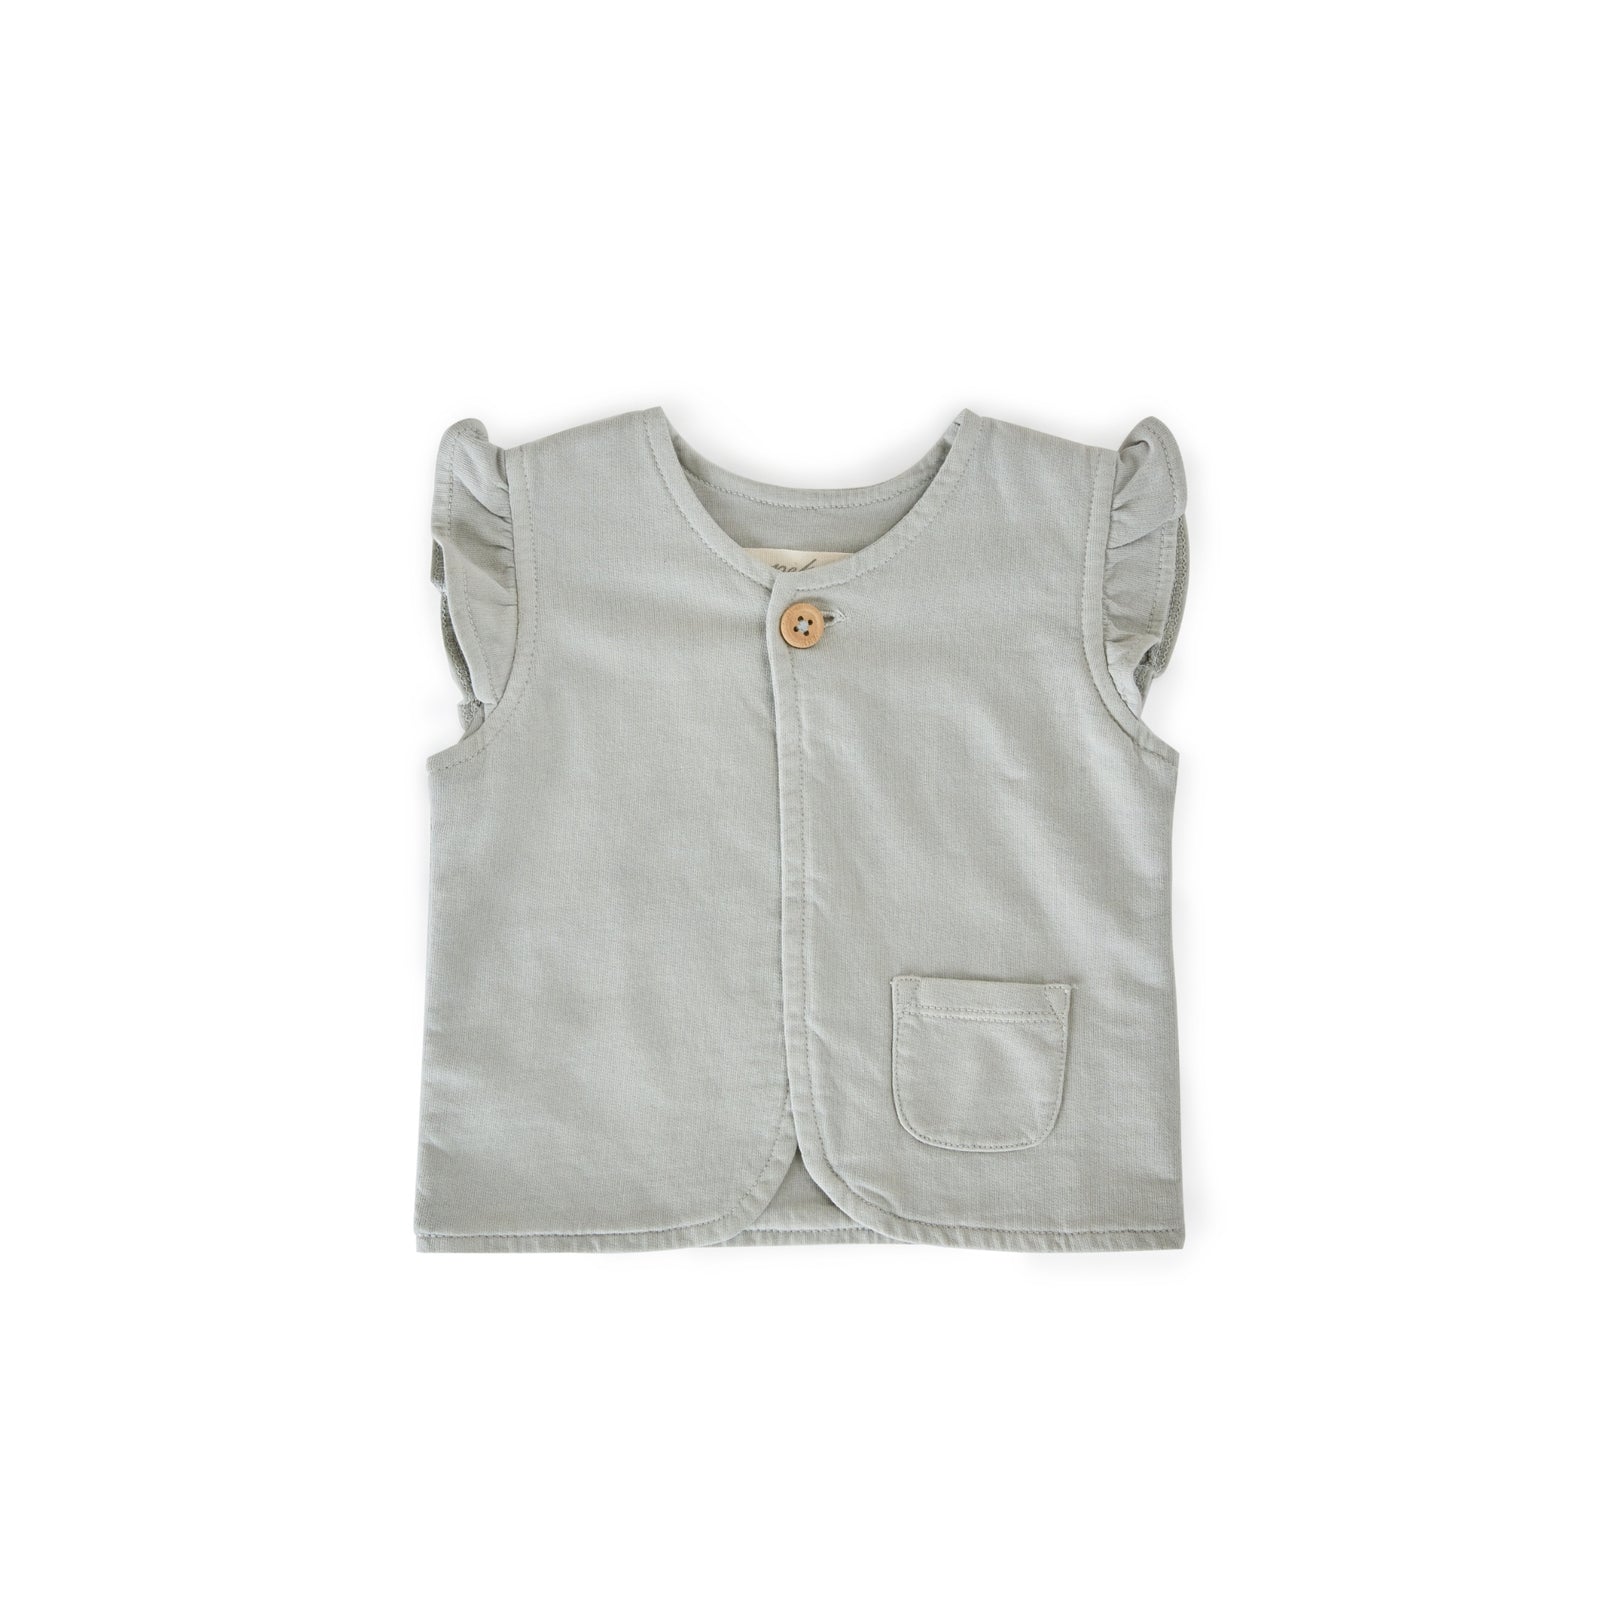 French Terry Ruffle Vest Top Pehr Canada Soft Sea 0 - 6 mos. 